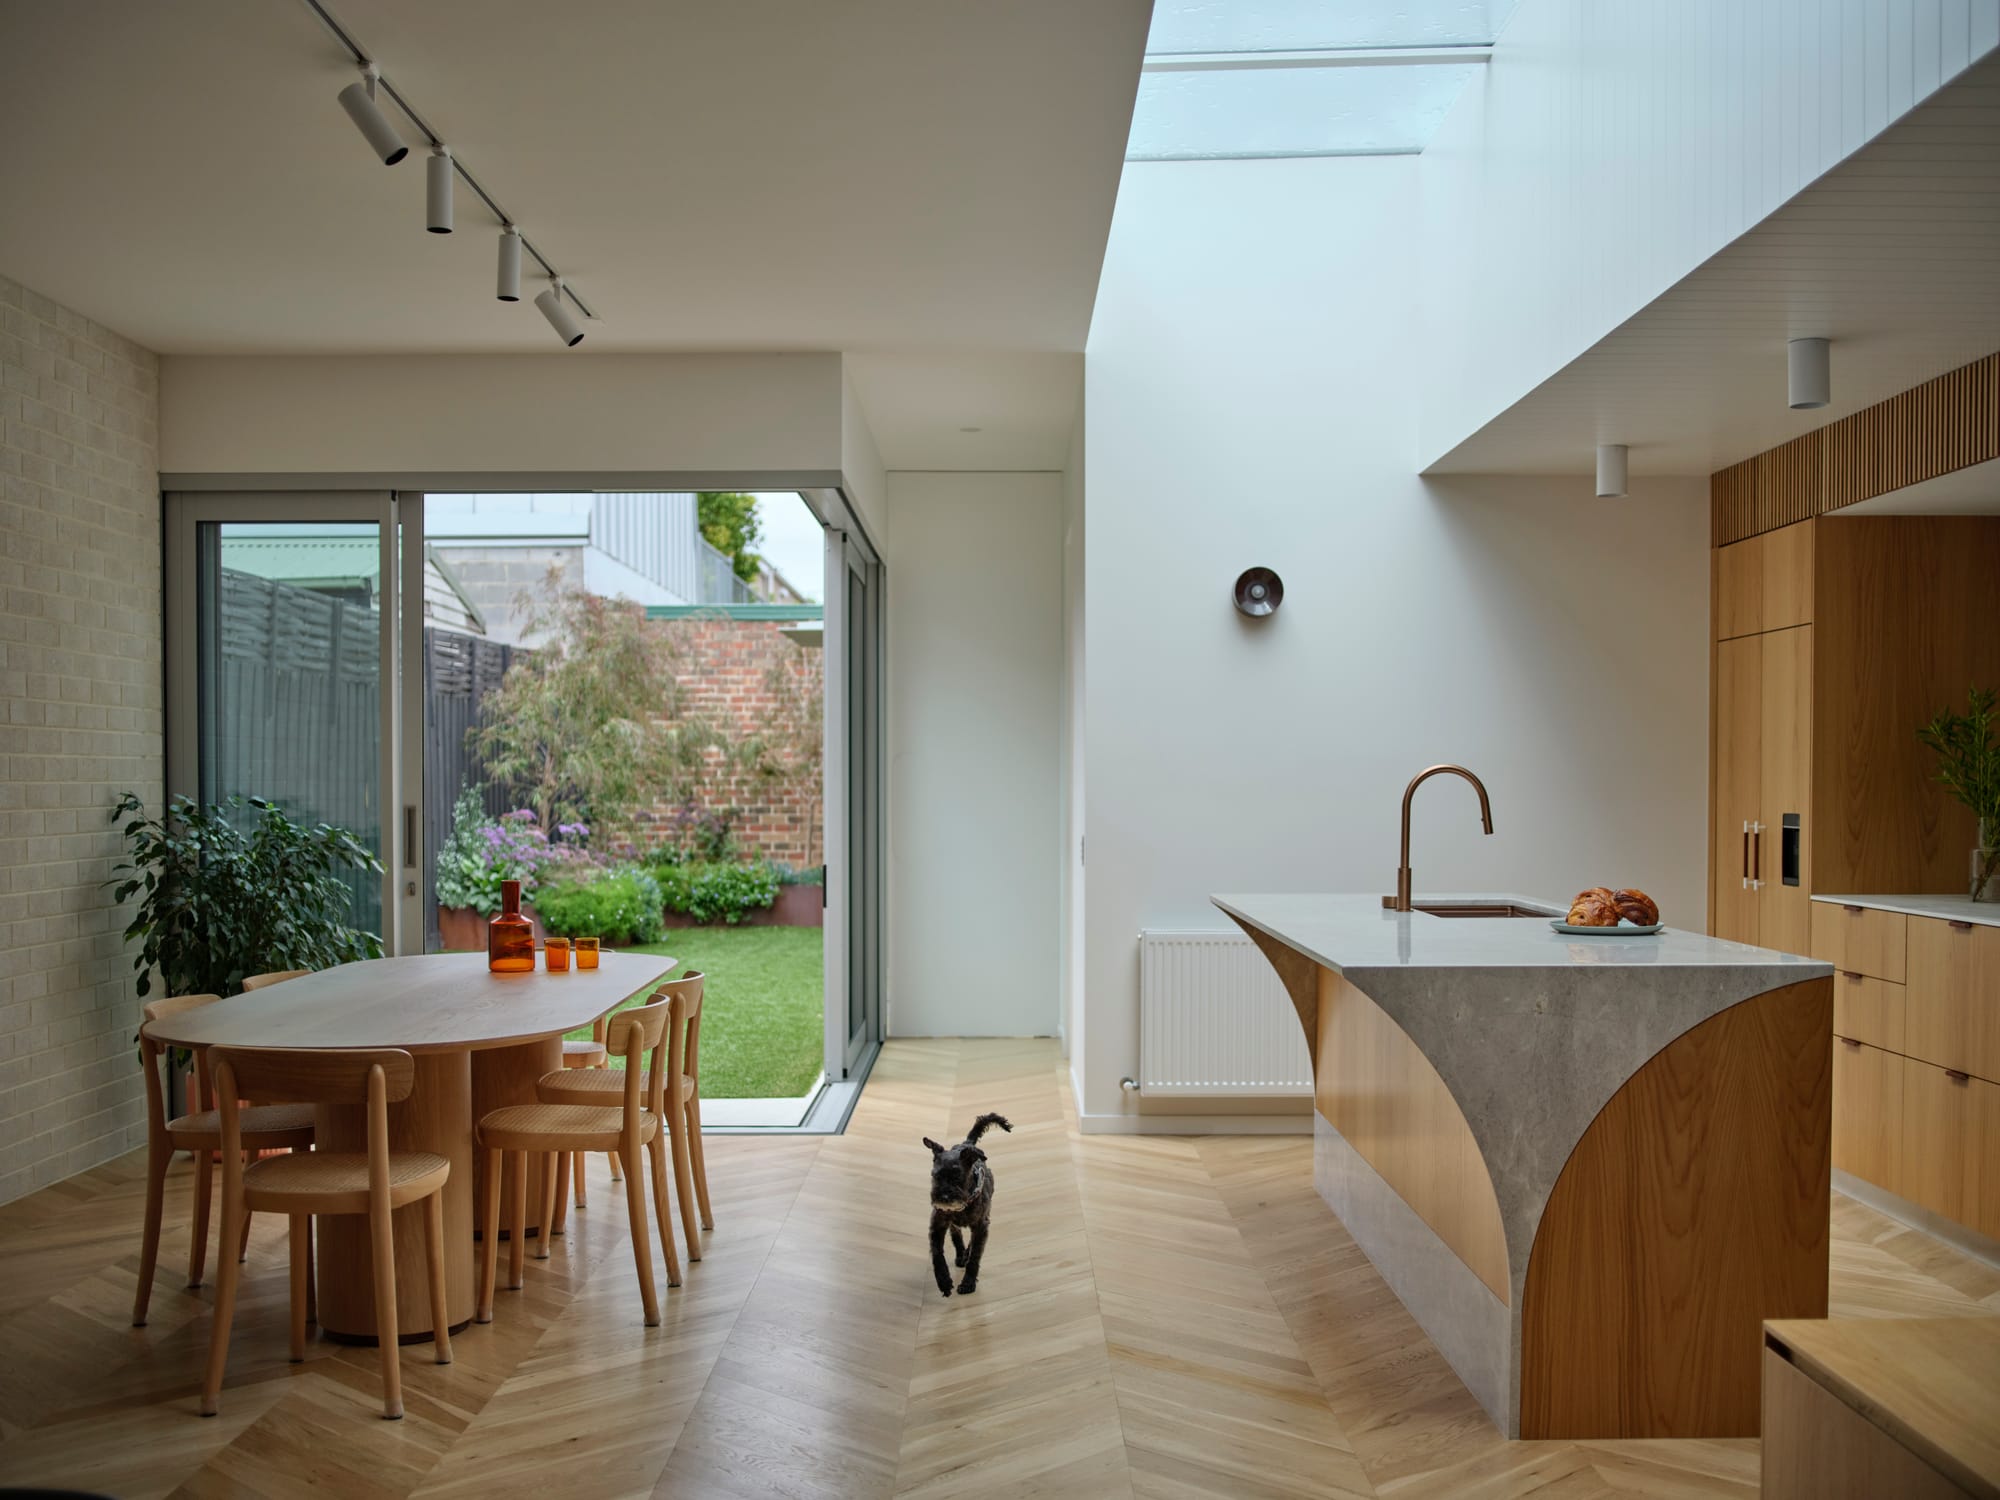 ZigZag House by True Story. Photography by Dean Bradley. Kitchen and dining room with herringbone timber floors, timber kitchen counters and dining table. Opens onto grassed courtyard.